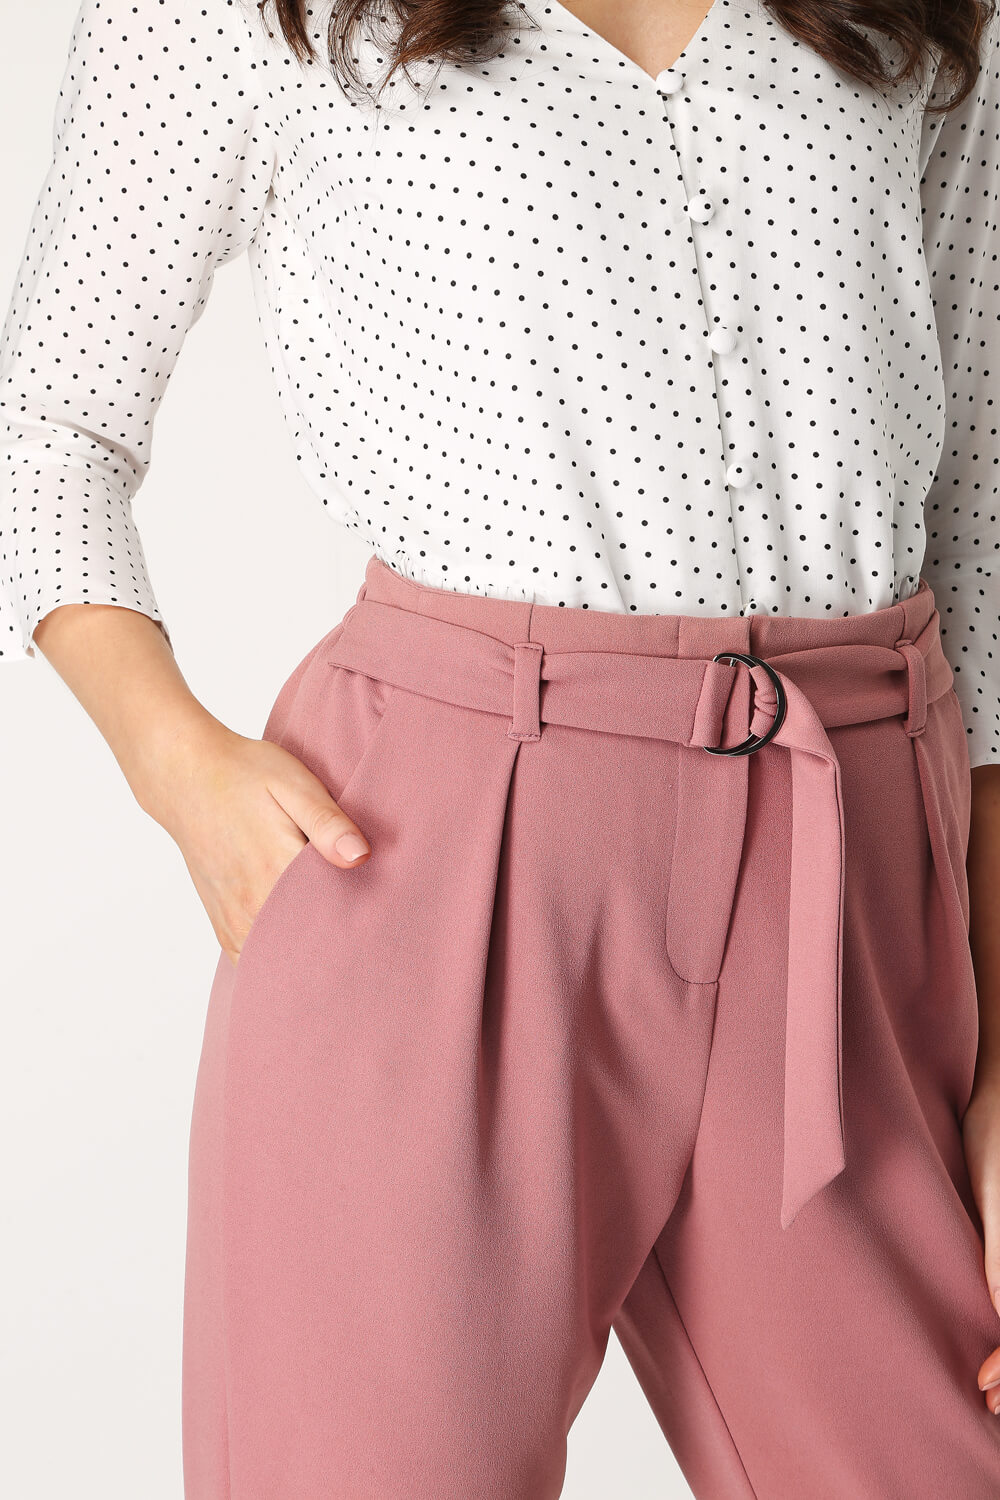 PINK Belted Tailored Trousers , Image 4 of 5